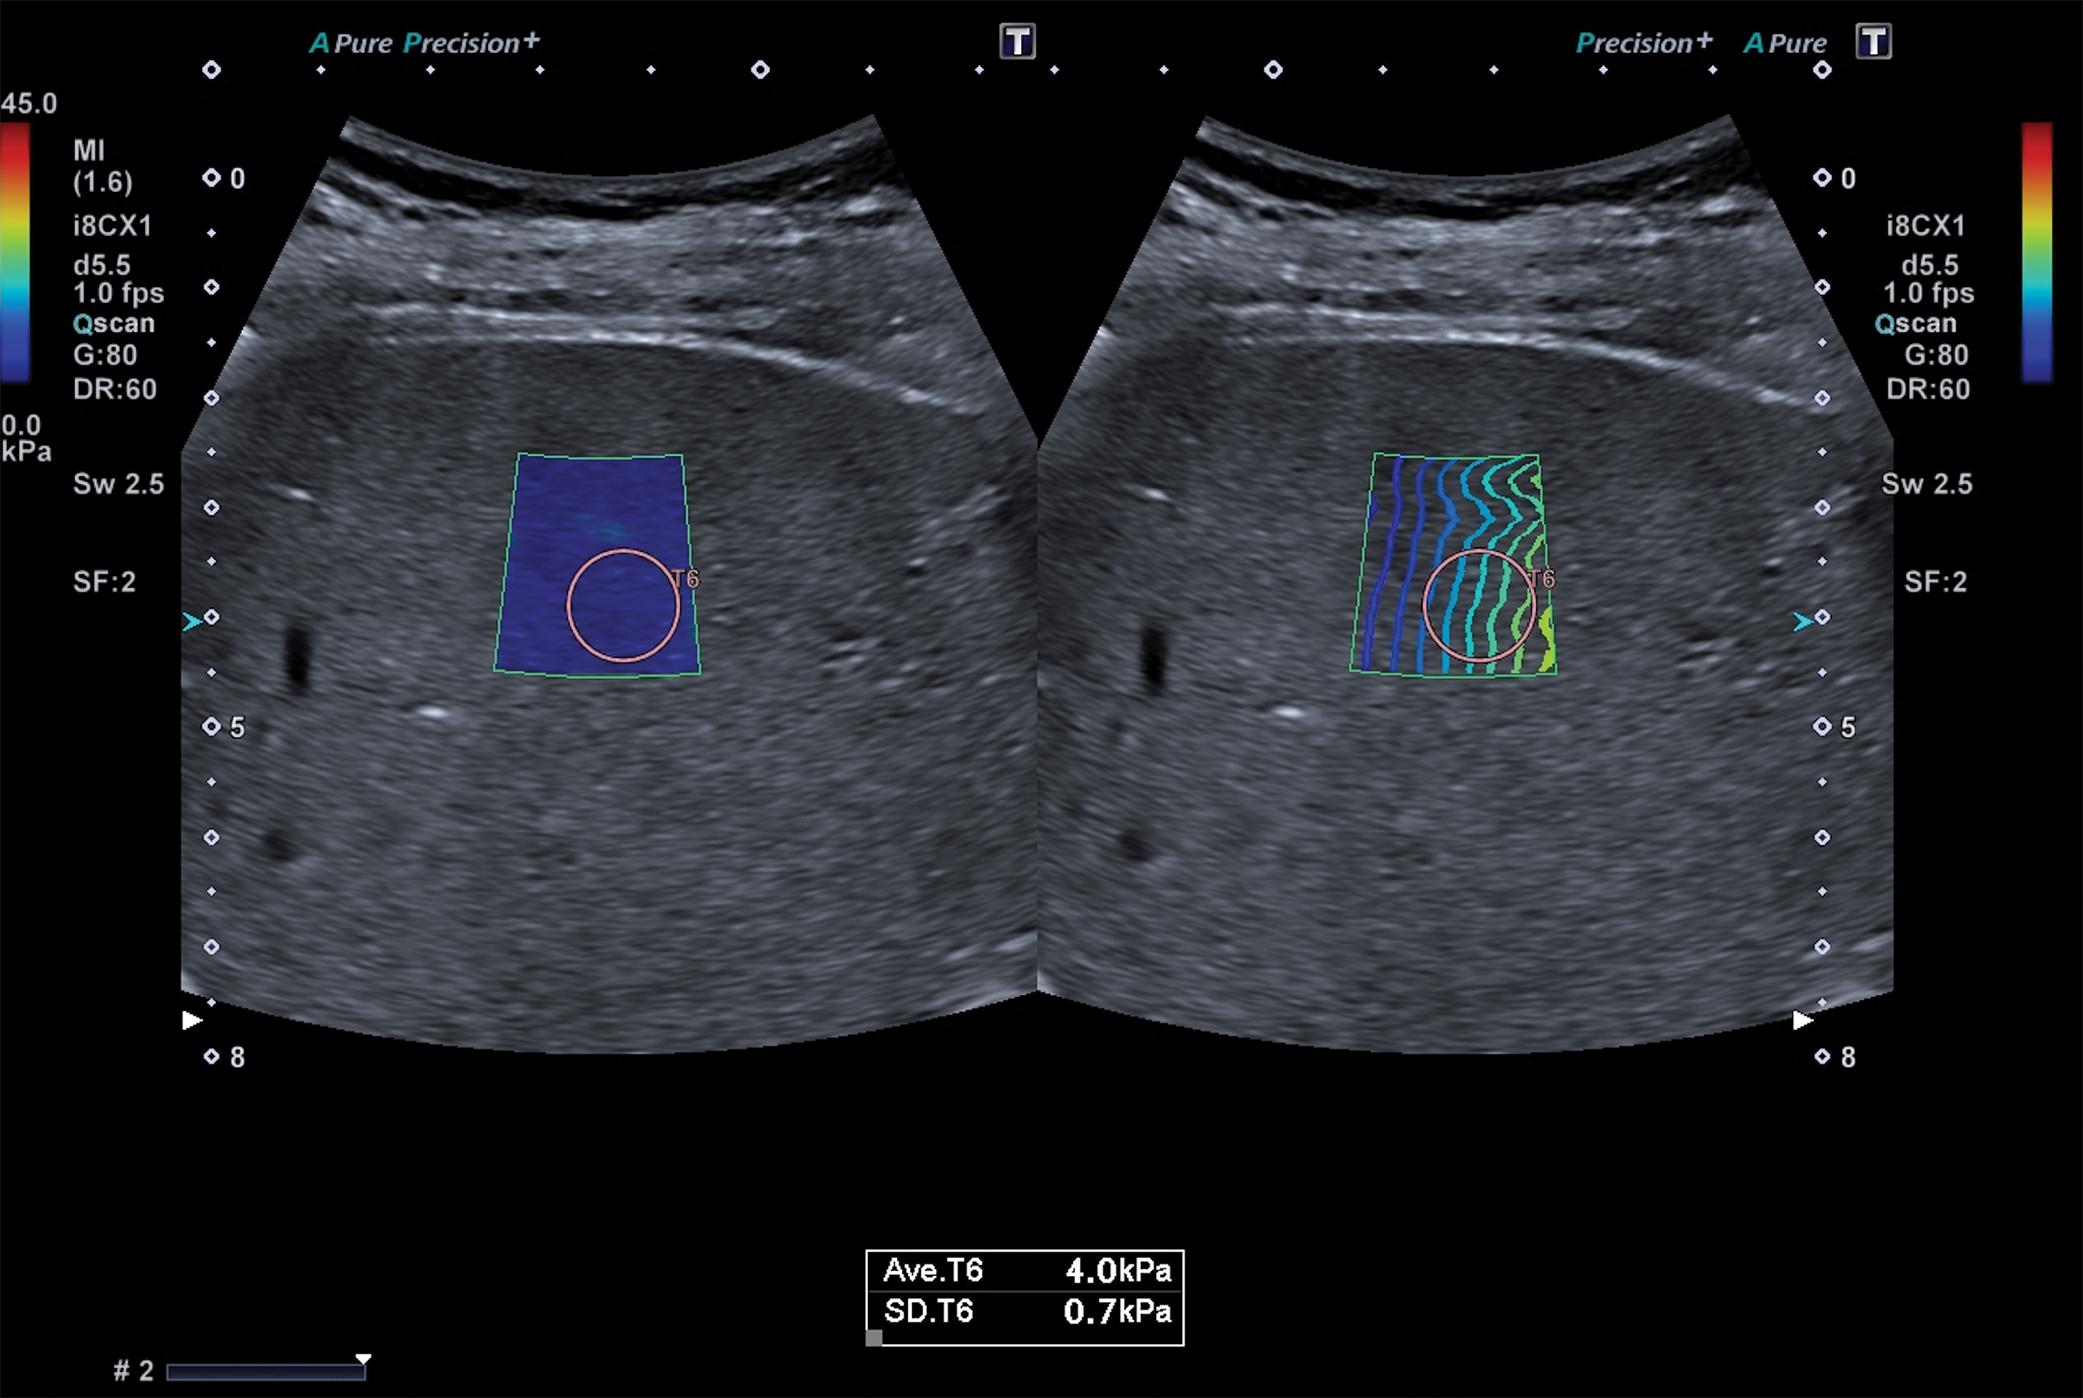 Fig. 7.3, Treatment-naïve 55-year-old woman with chronic hepatitis C. The stiffness value, obtained with the Canon two-dimensional shear wave elastography technique, is below 5 kPa. Therefore there is a high likelihood of absence of liver fibrosis.